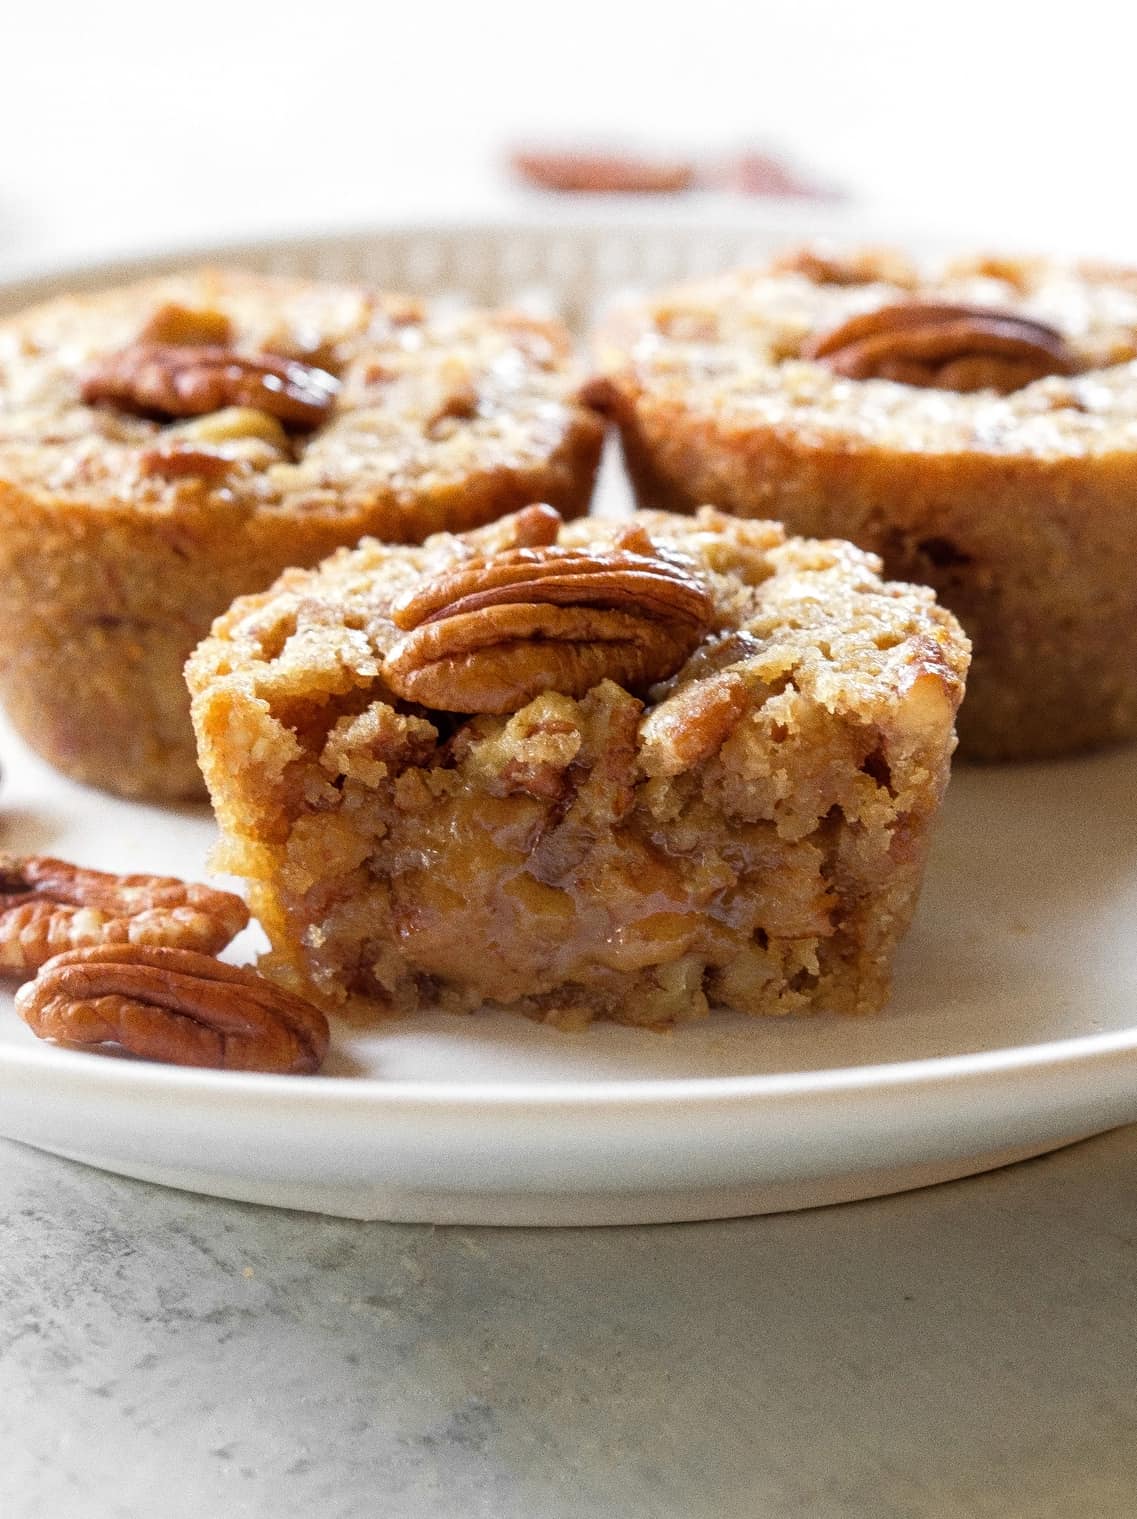 https://www.the-girl-who-ate-everything.com/wp-content/uploads/2012/11/pecan-pie-muffins-27-1.jpg